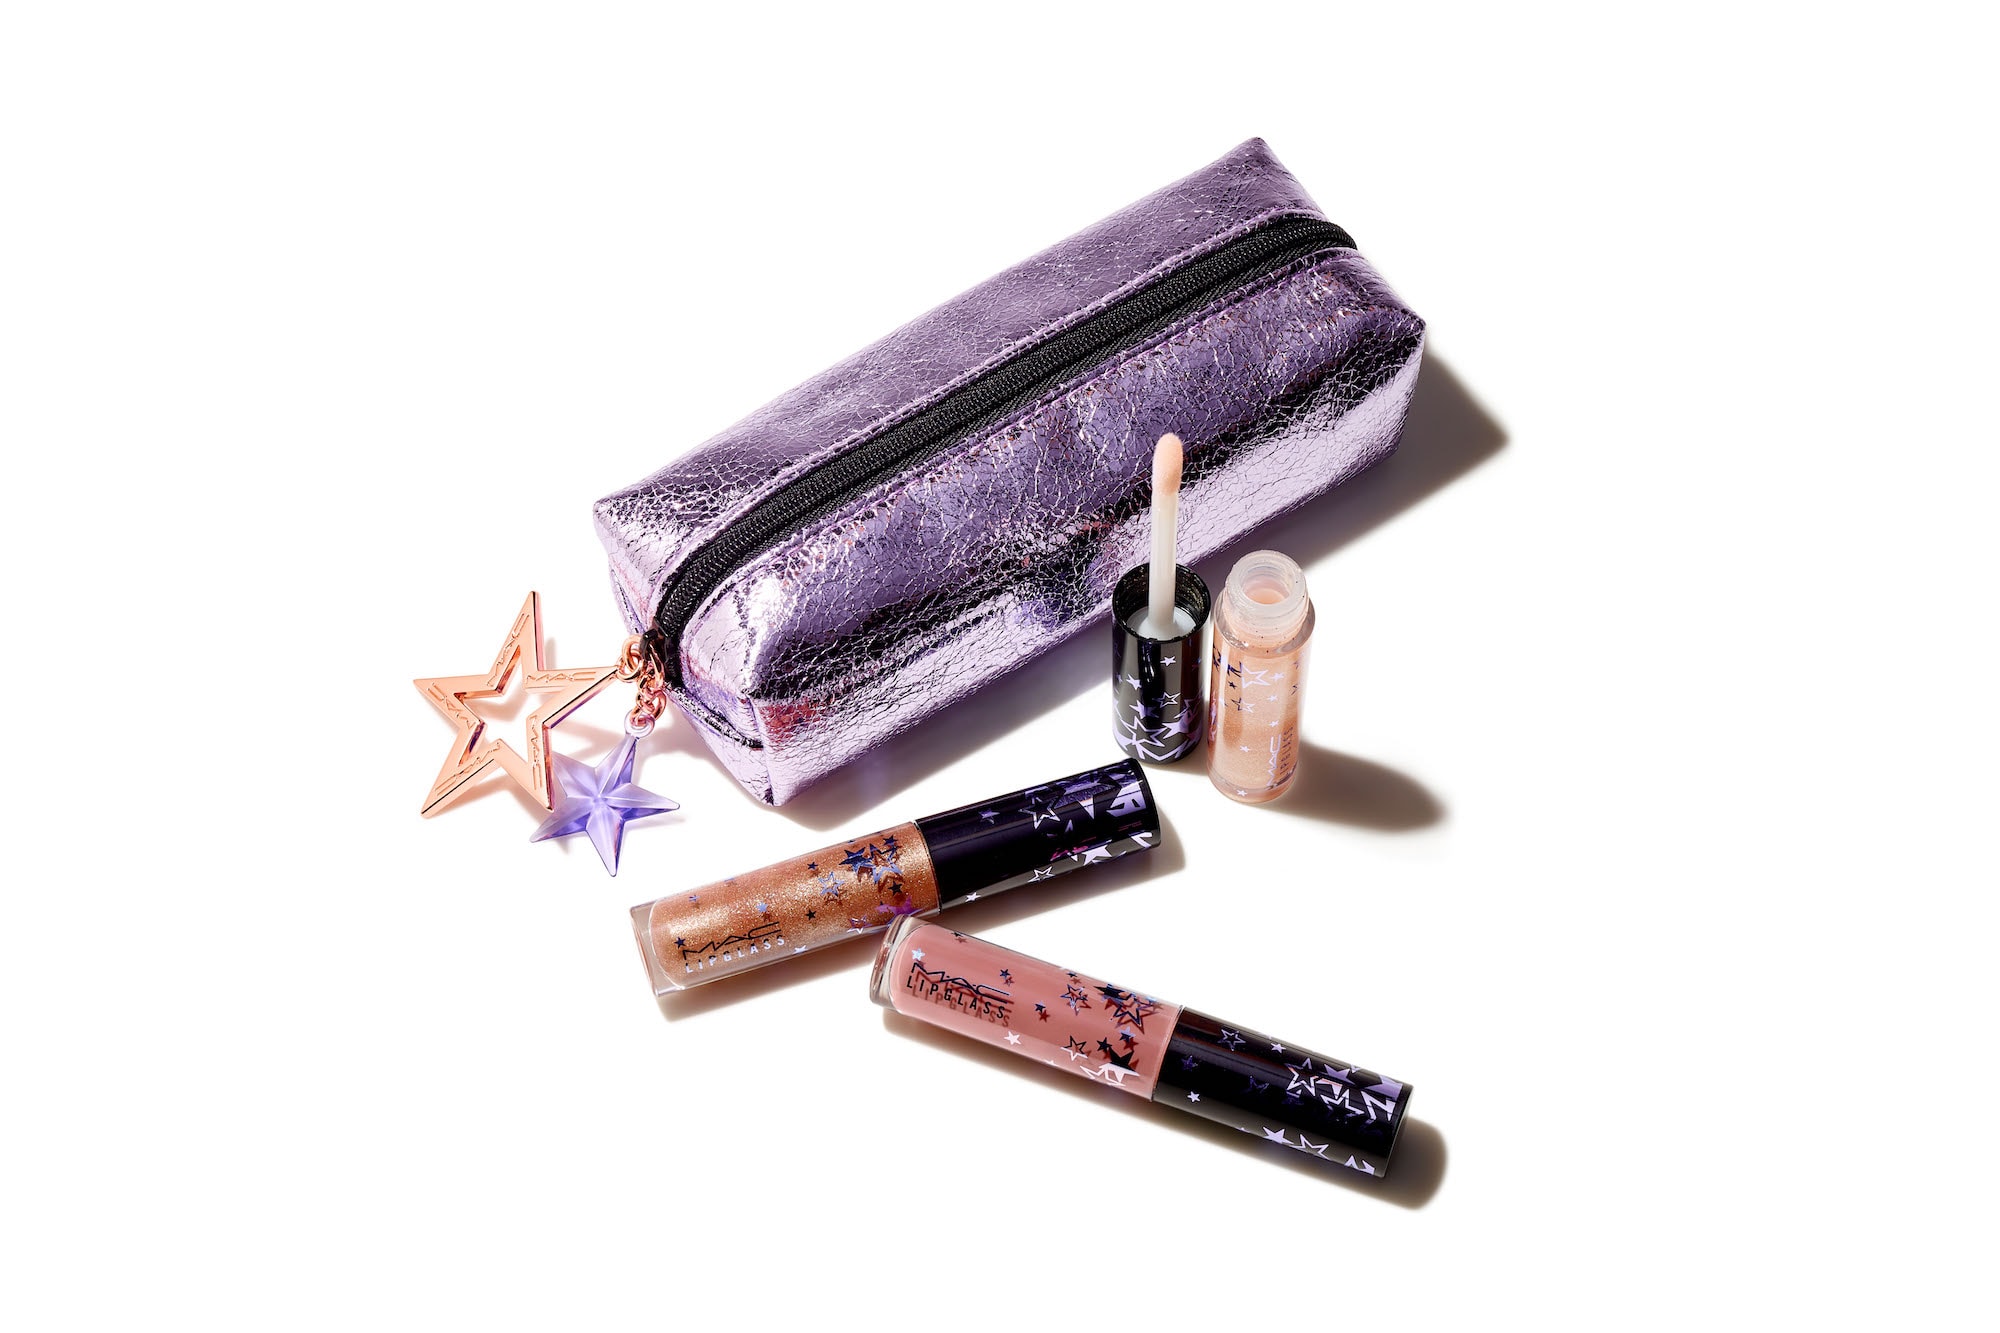 MAC Cosmetics "Starring You" Makeup Collection Lipstick Eyeshadow Glitter Holiday Glam Beauty Products 